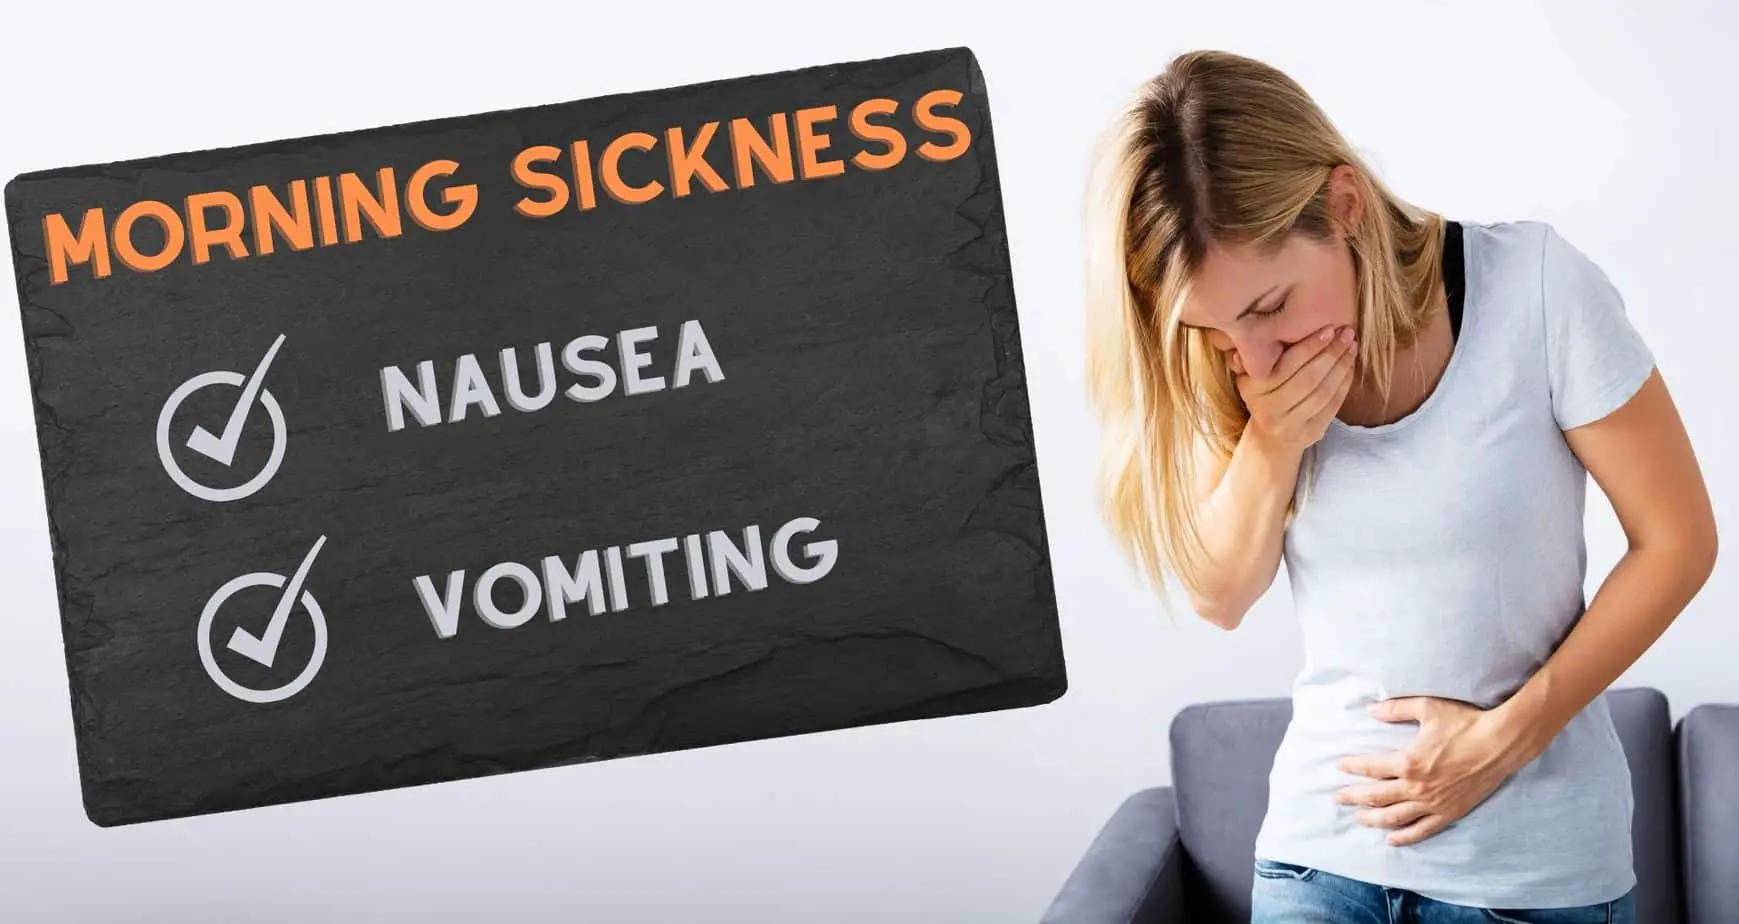 When Does Morning Sickness Start And How To Prevent It?